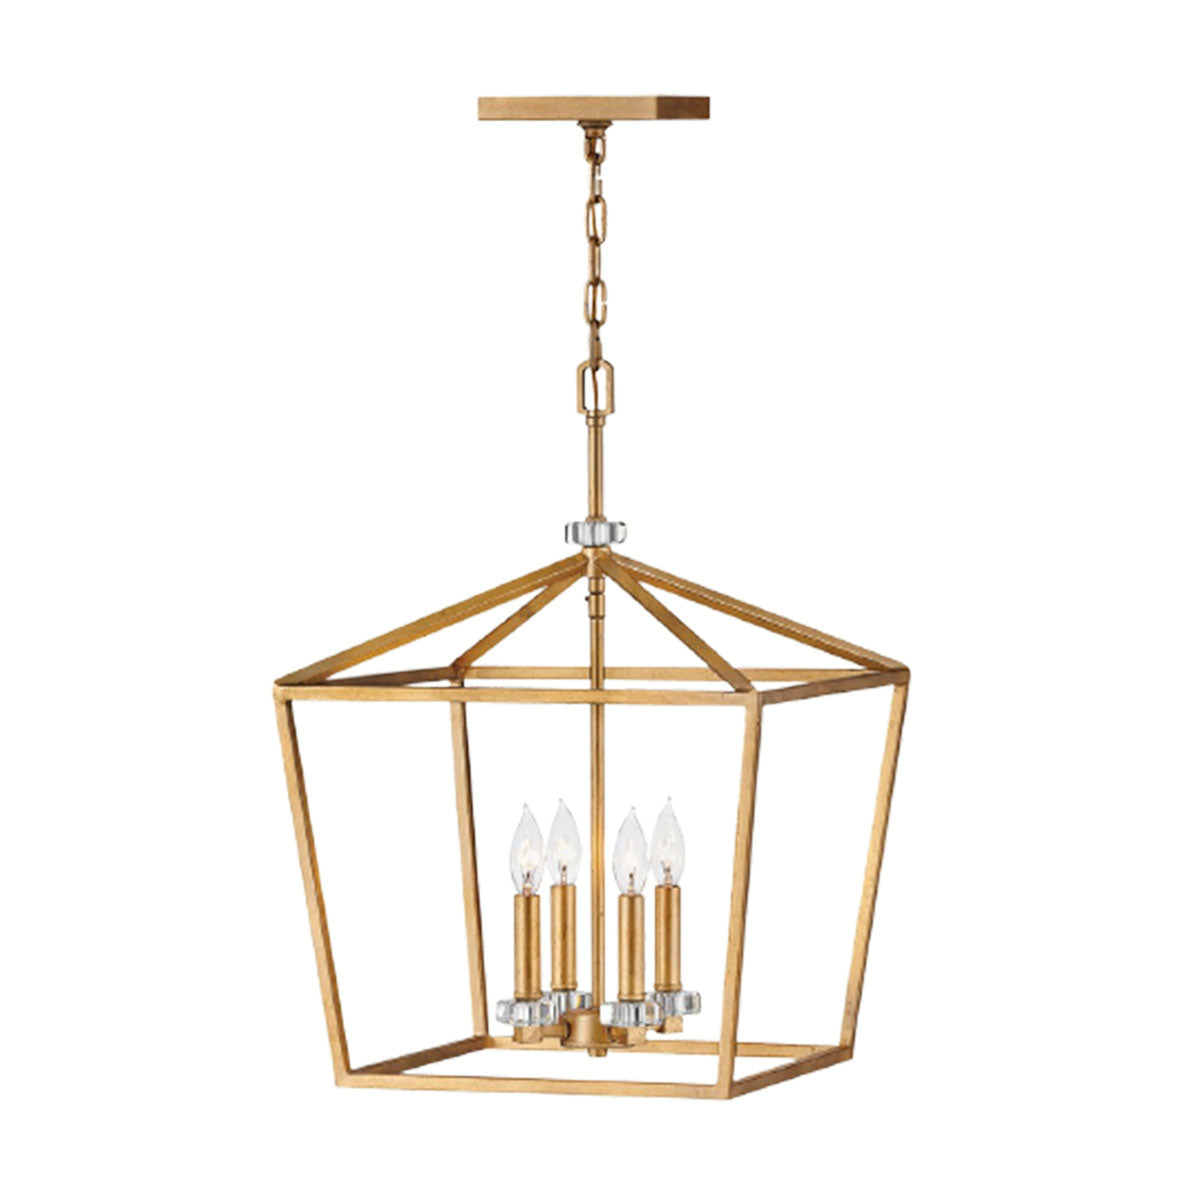 Large Ceiling Light In Distressed Brass Finish